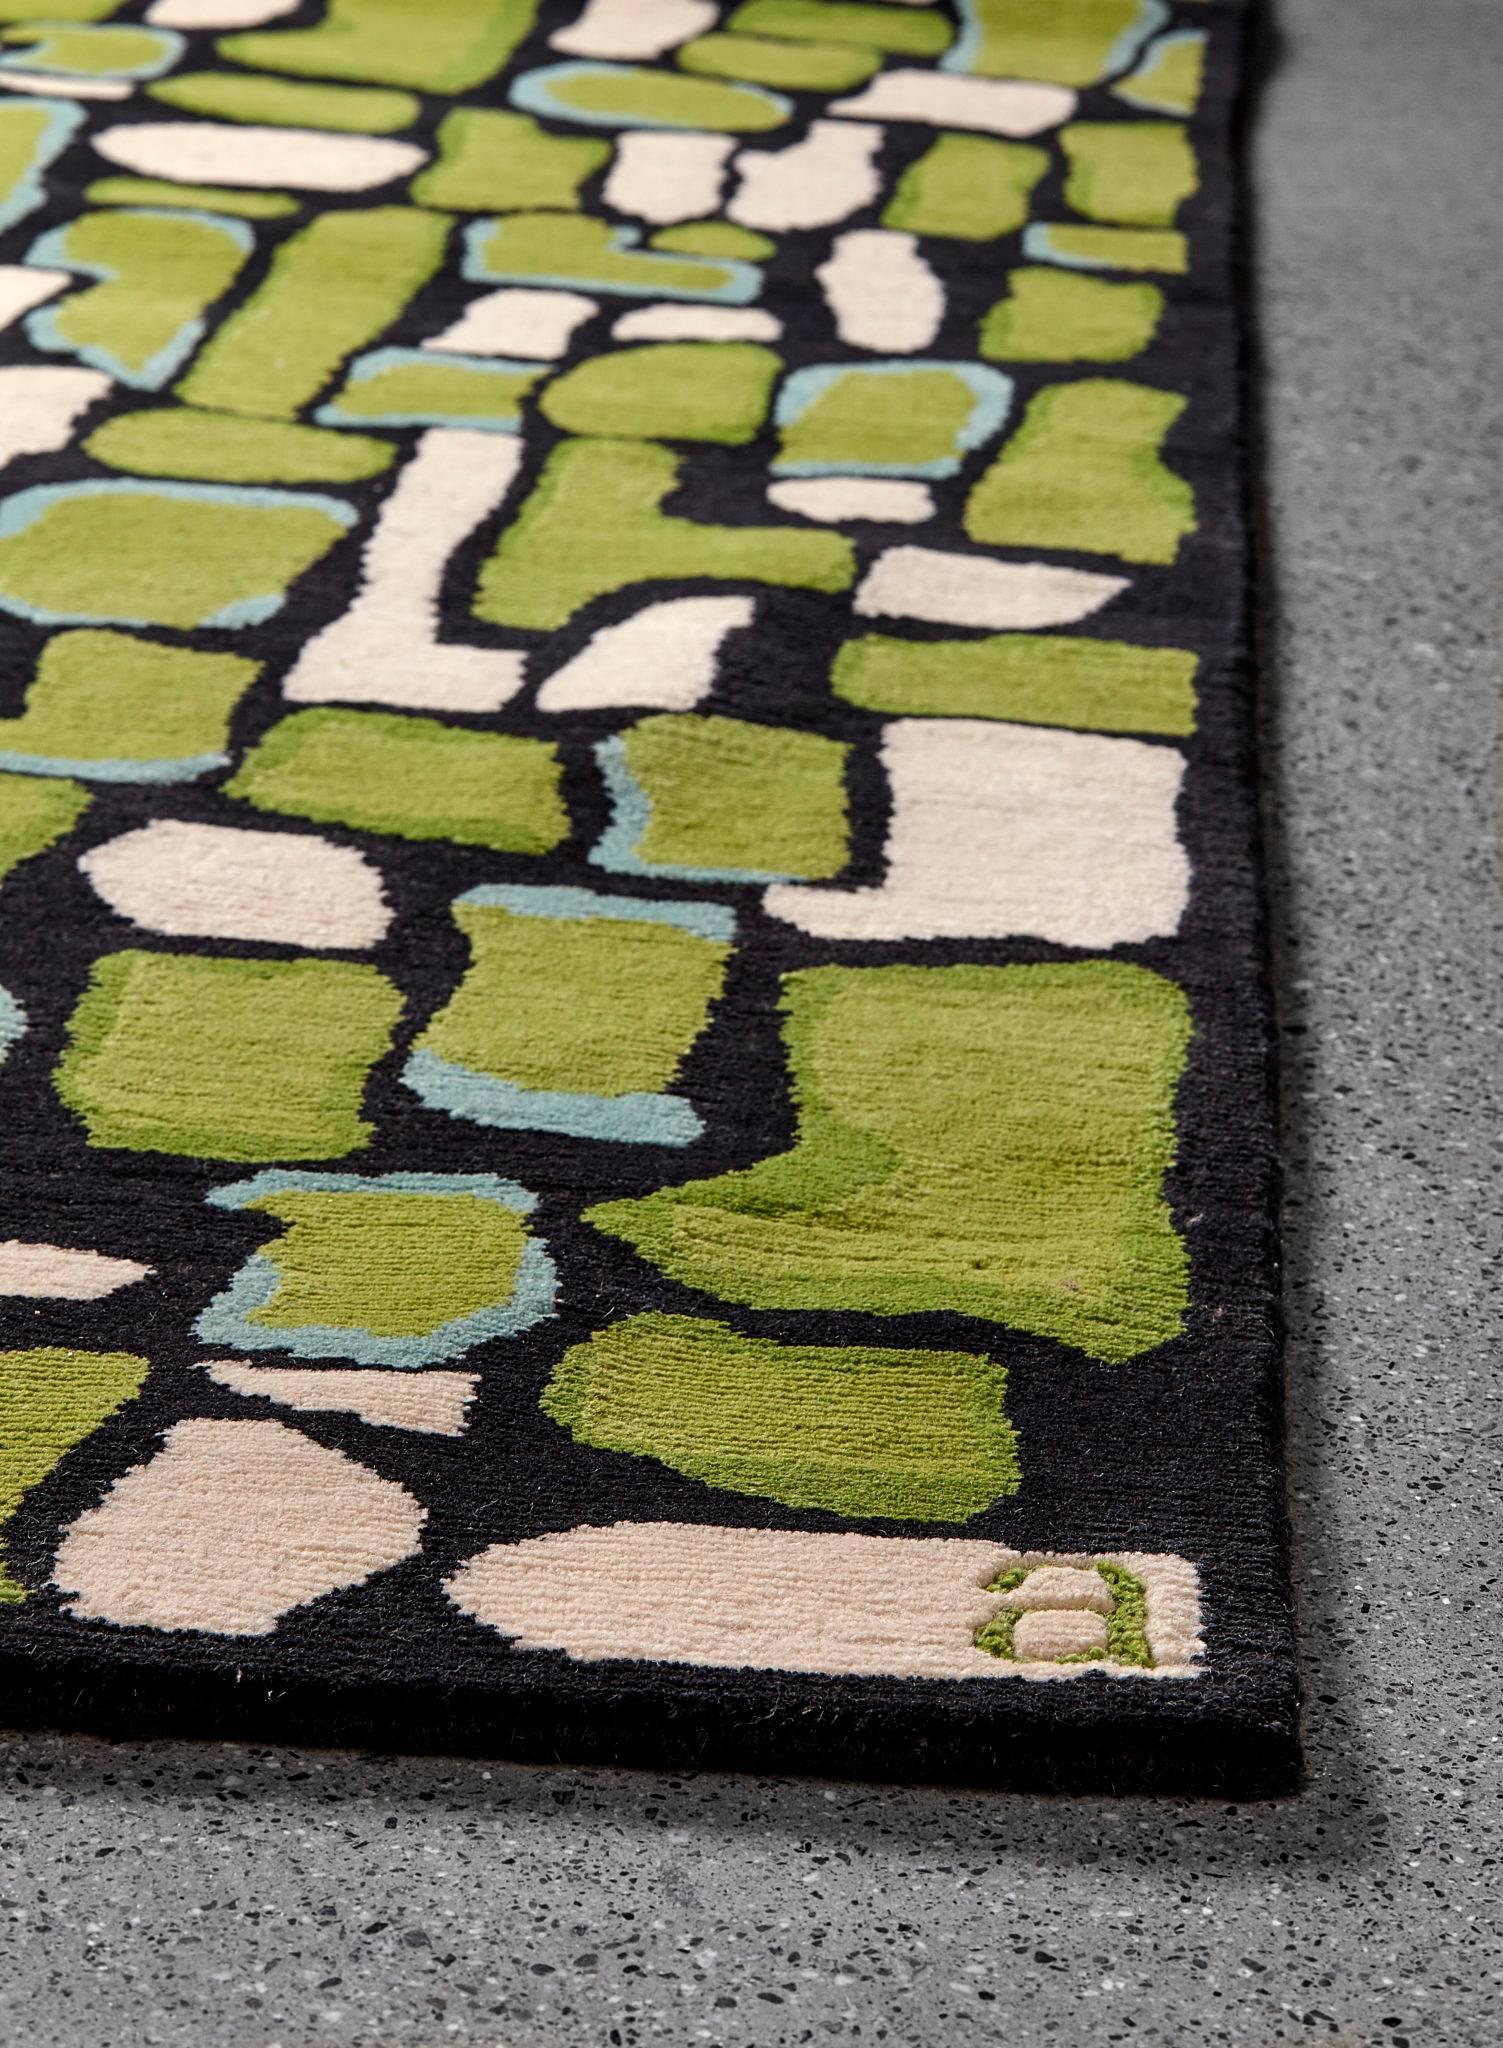 Composites of the simplest elements make up some of the greatest wonders of the natural world. The Pyrite / Emerald area rug from Angela Adams combines simple, colorful, organic shapes in black, green and turquoise to create a textural landscape.